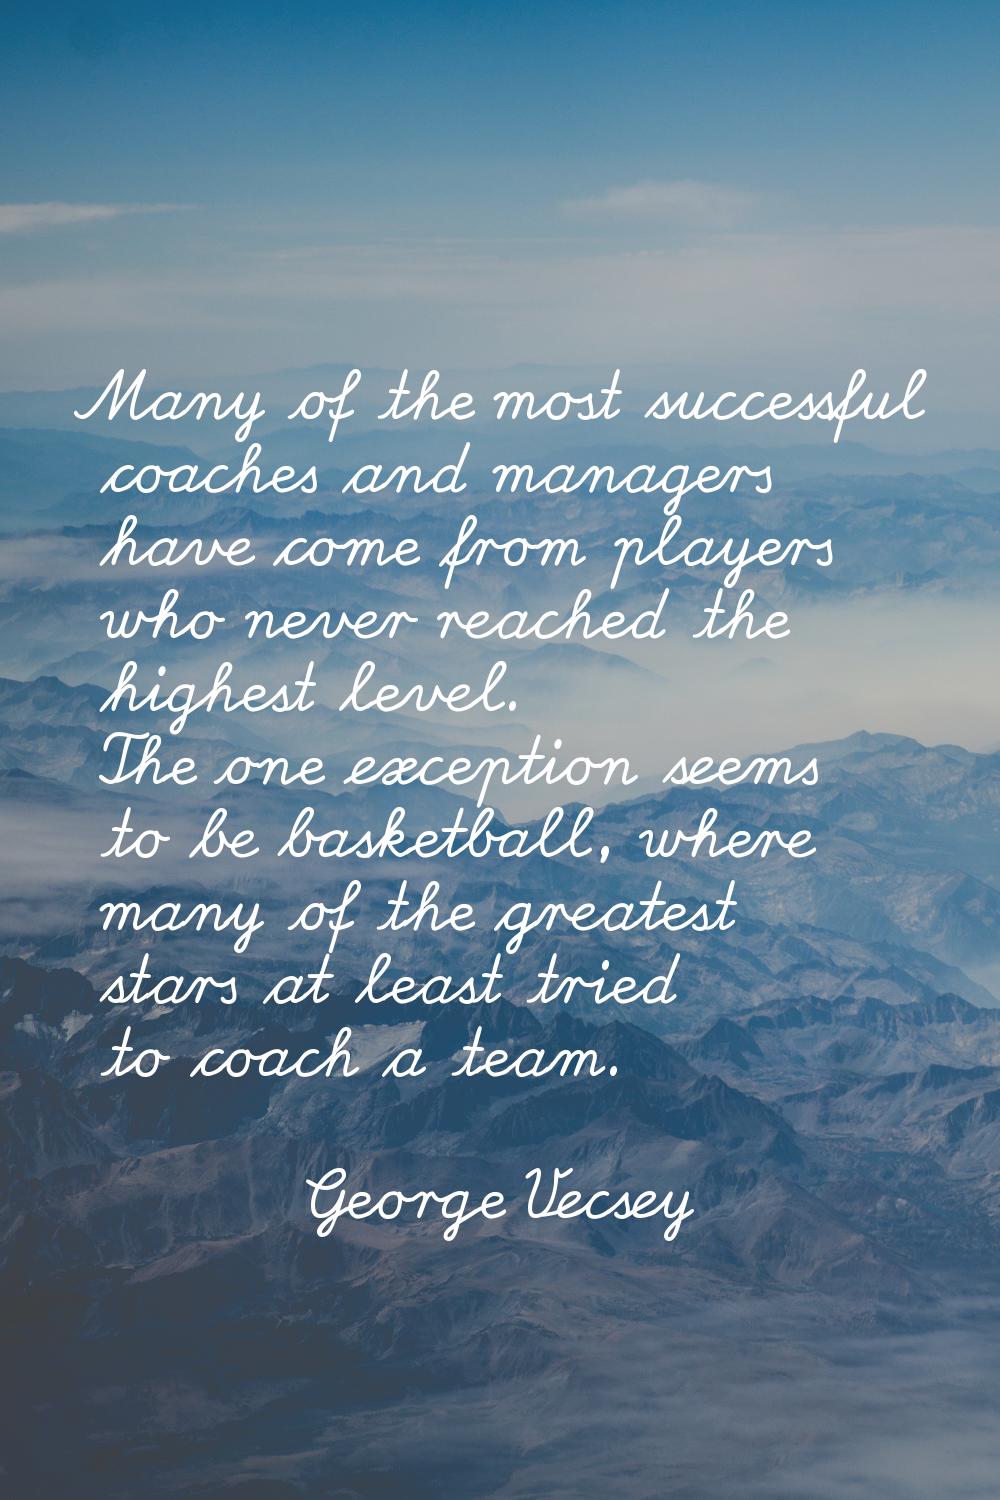 Many of the most successful coaches and managers have come from players who never reached the highe